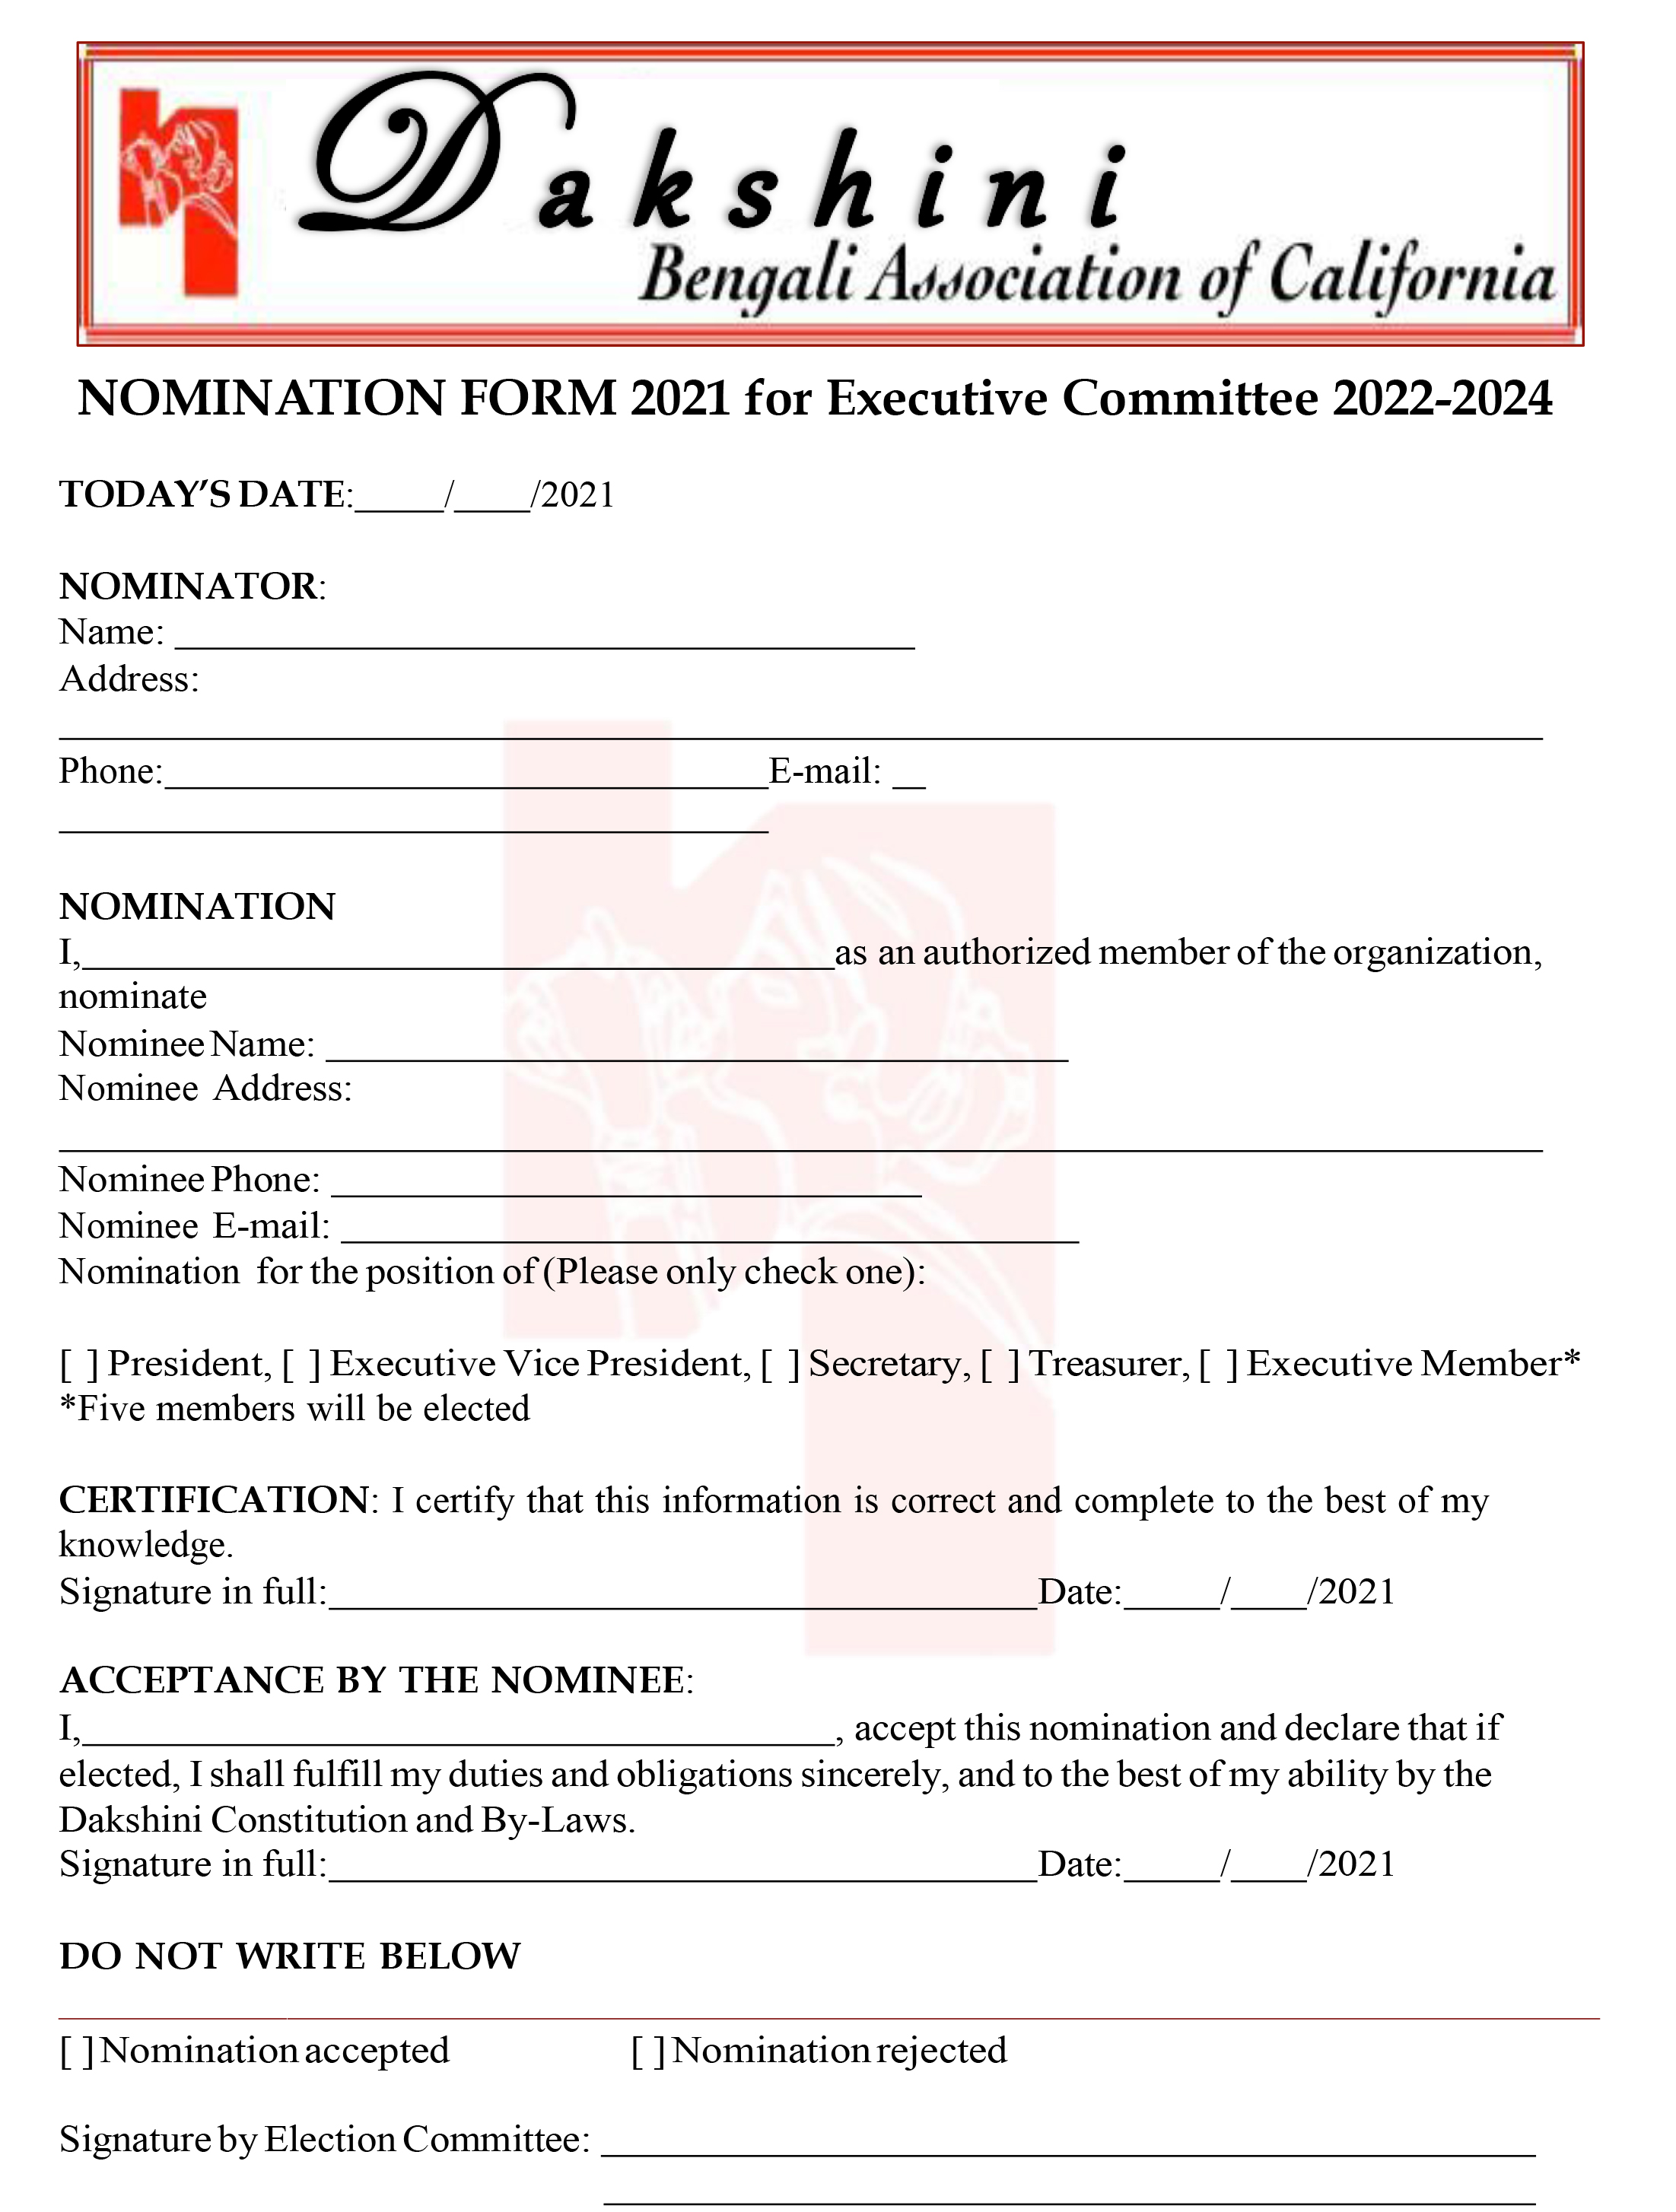 NOMINATION FORM 2021 for Executive Committee 2022-2024